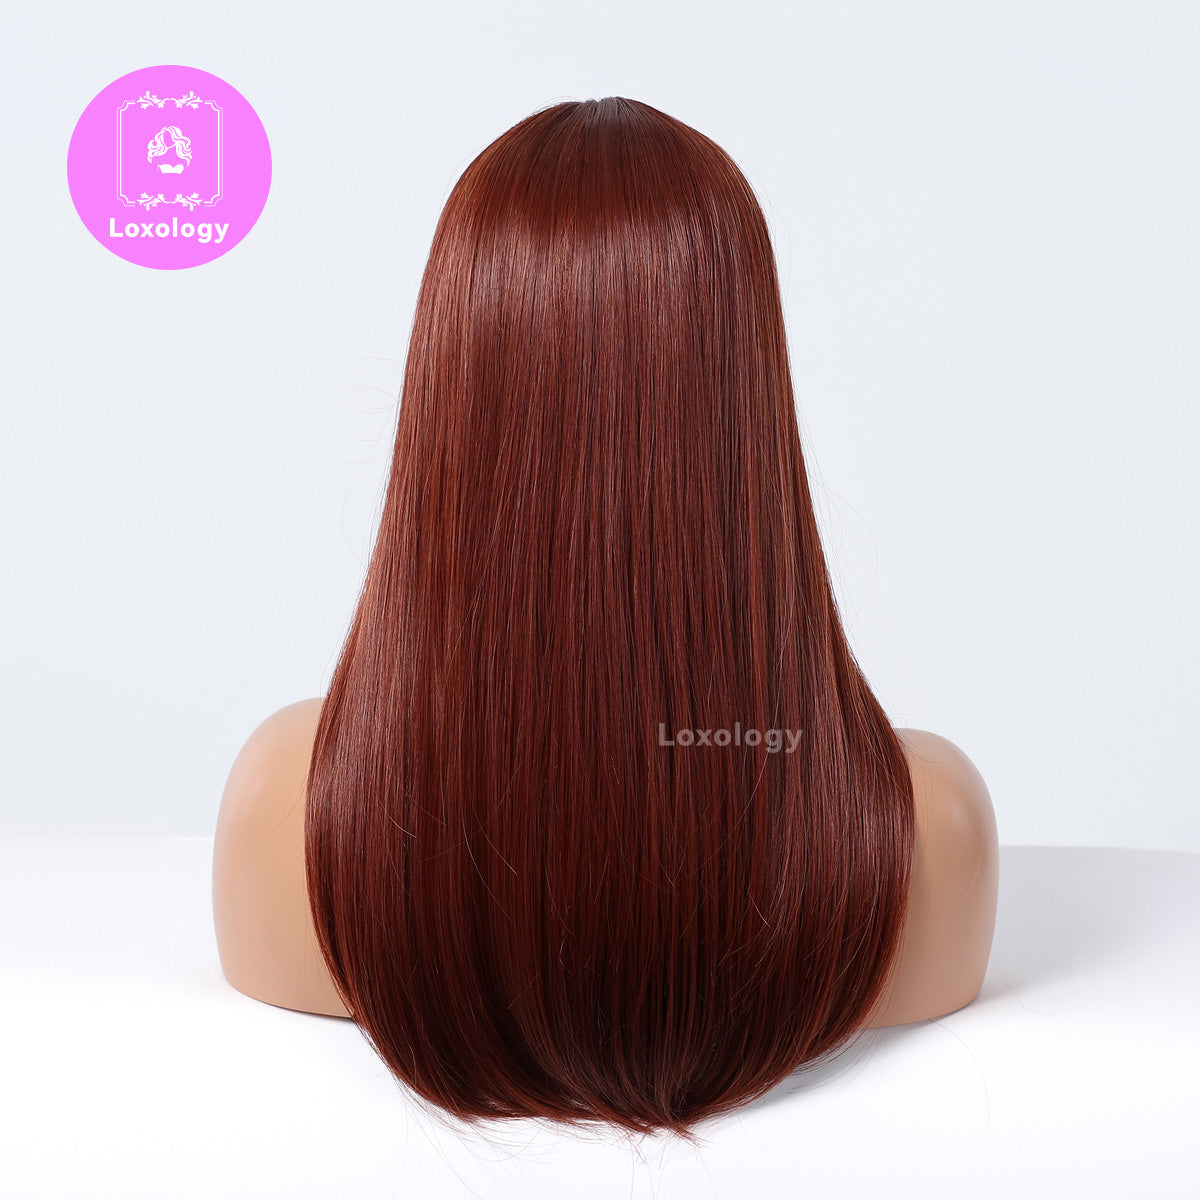 【Mabel】Loxology | 18 Inch Long Straight Orange Wigs with Bangs Synthetic Women's Wigs